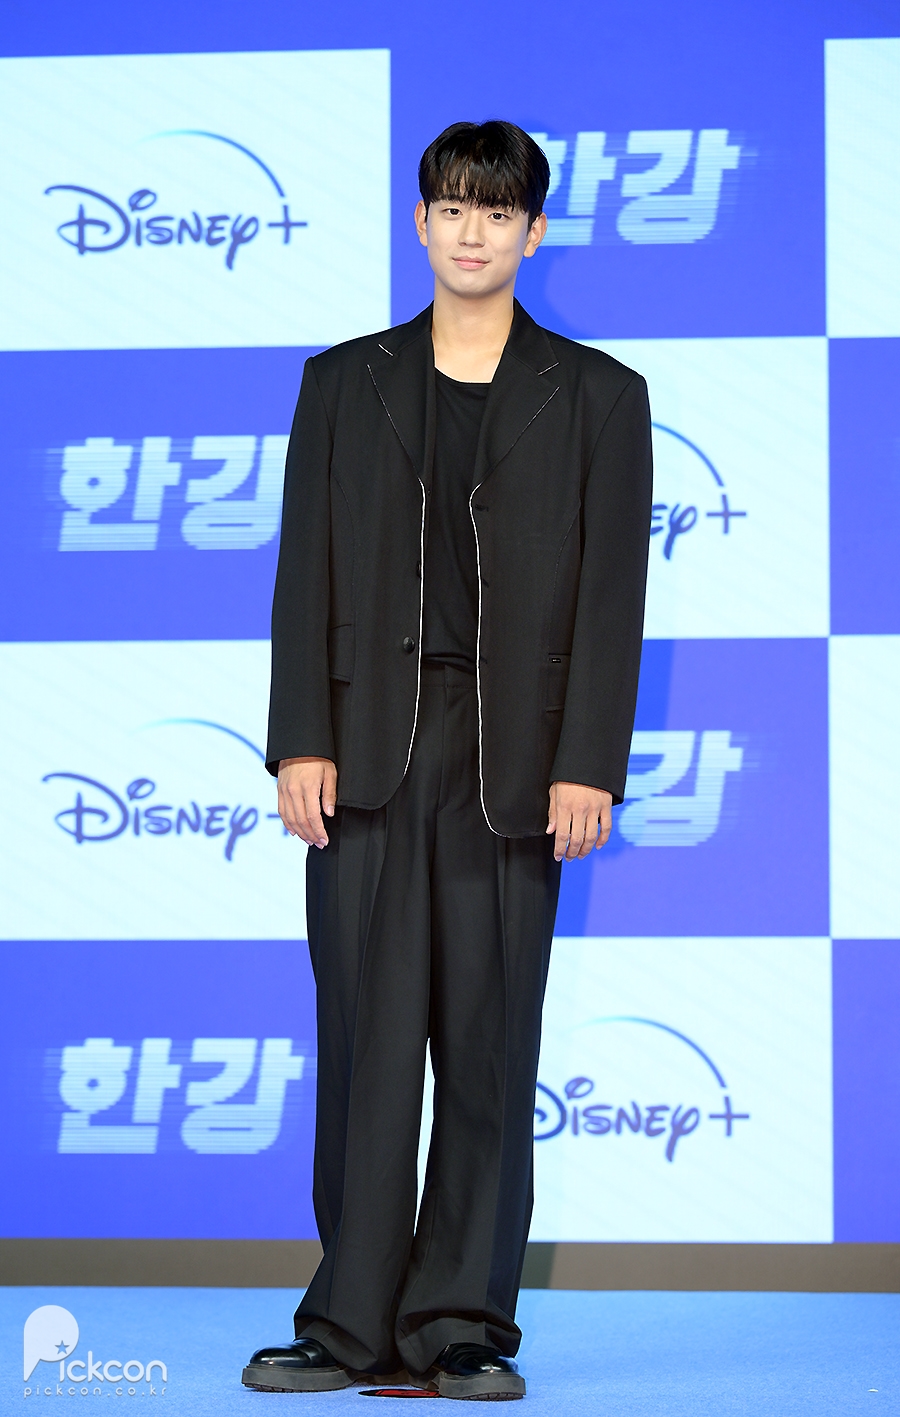 Actress Bae Da-bin attends a press event for her new Disney+ series in Seoul on Tuesday.